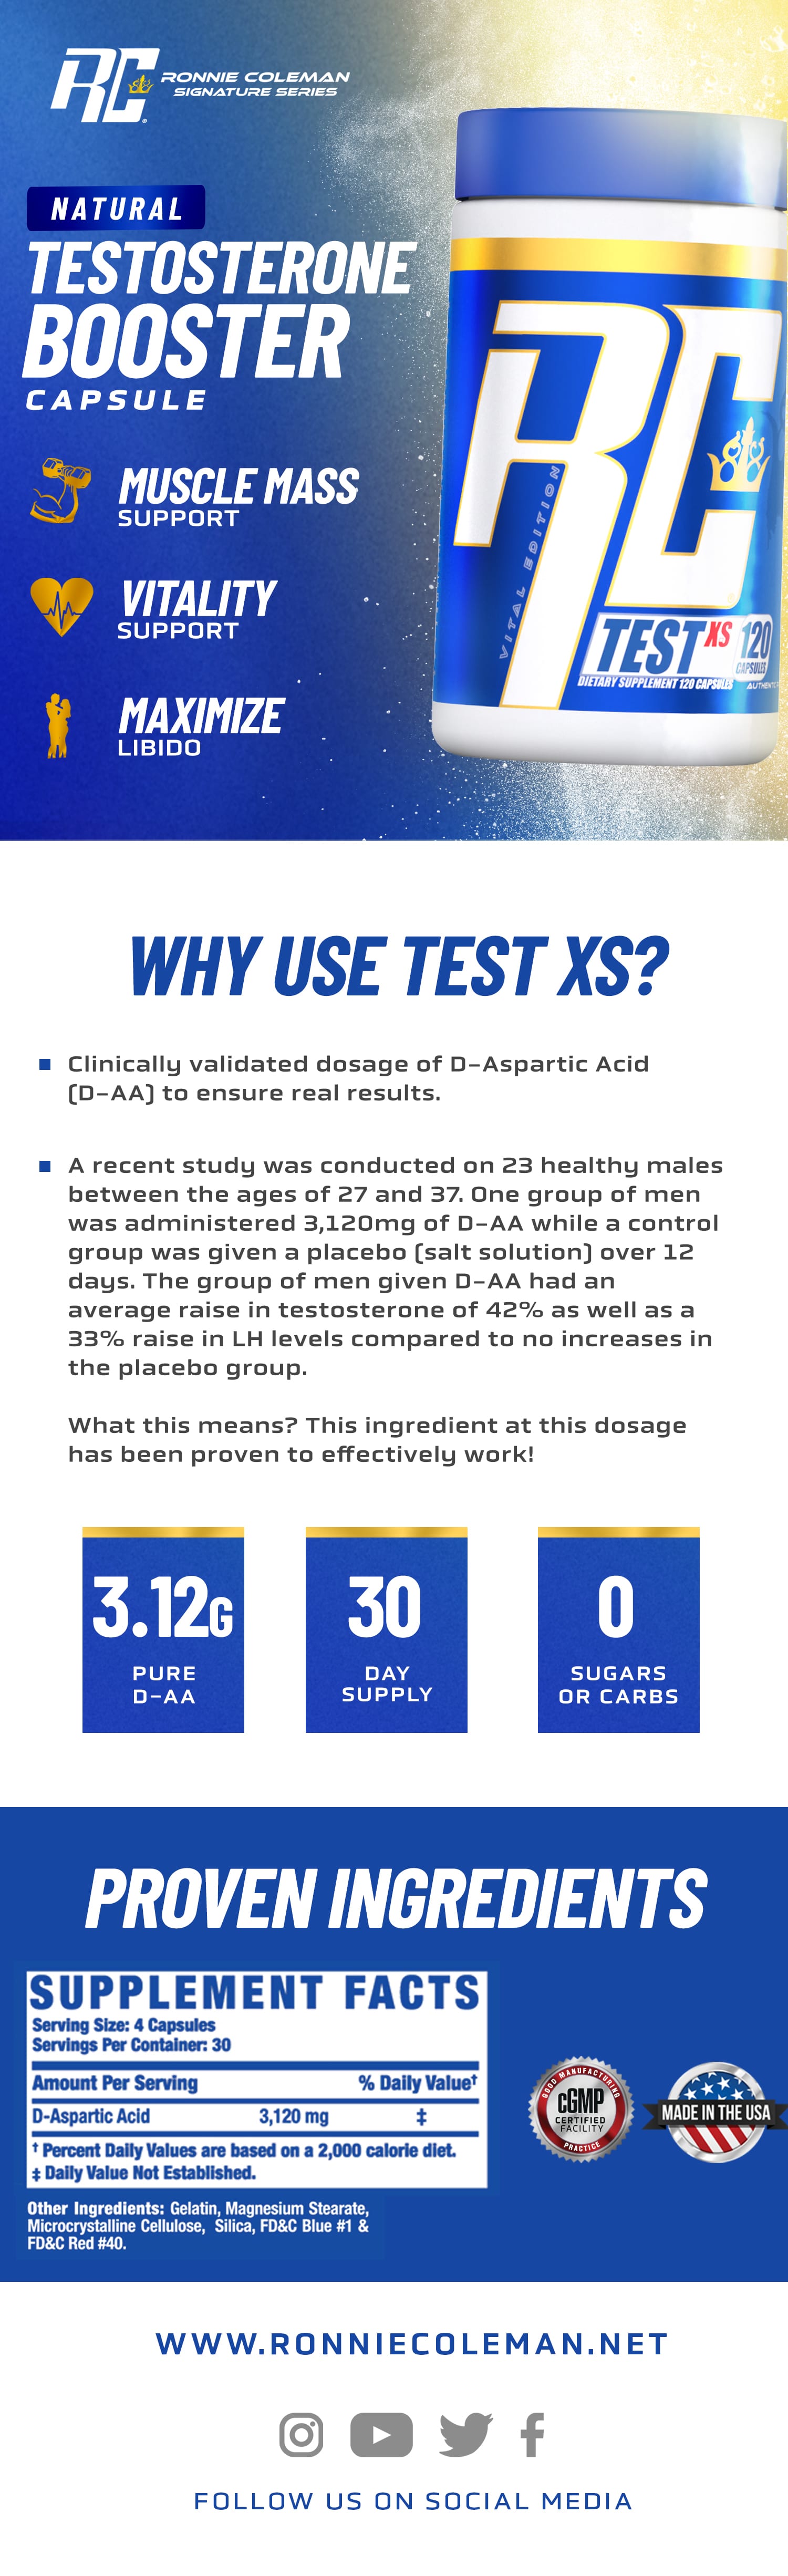 Test XS Capsule - Testosterone Booster